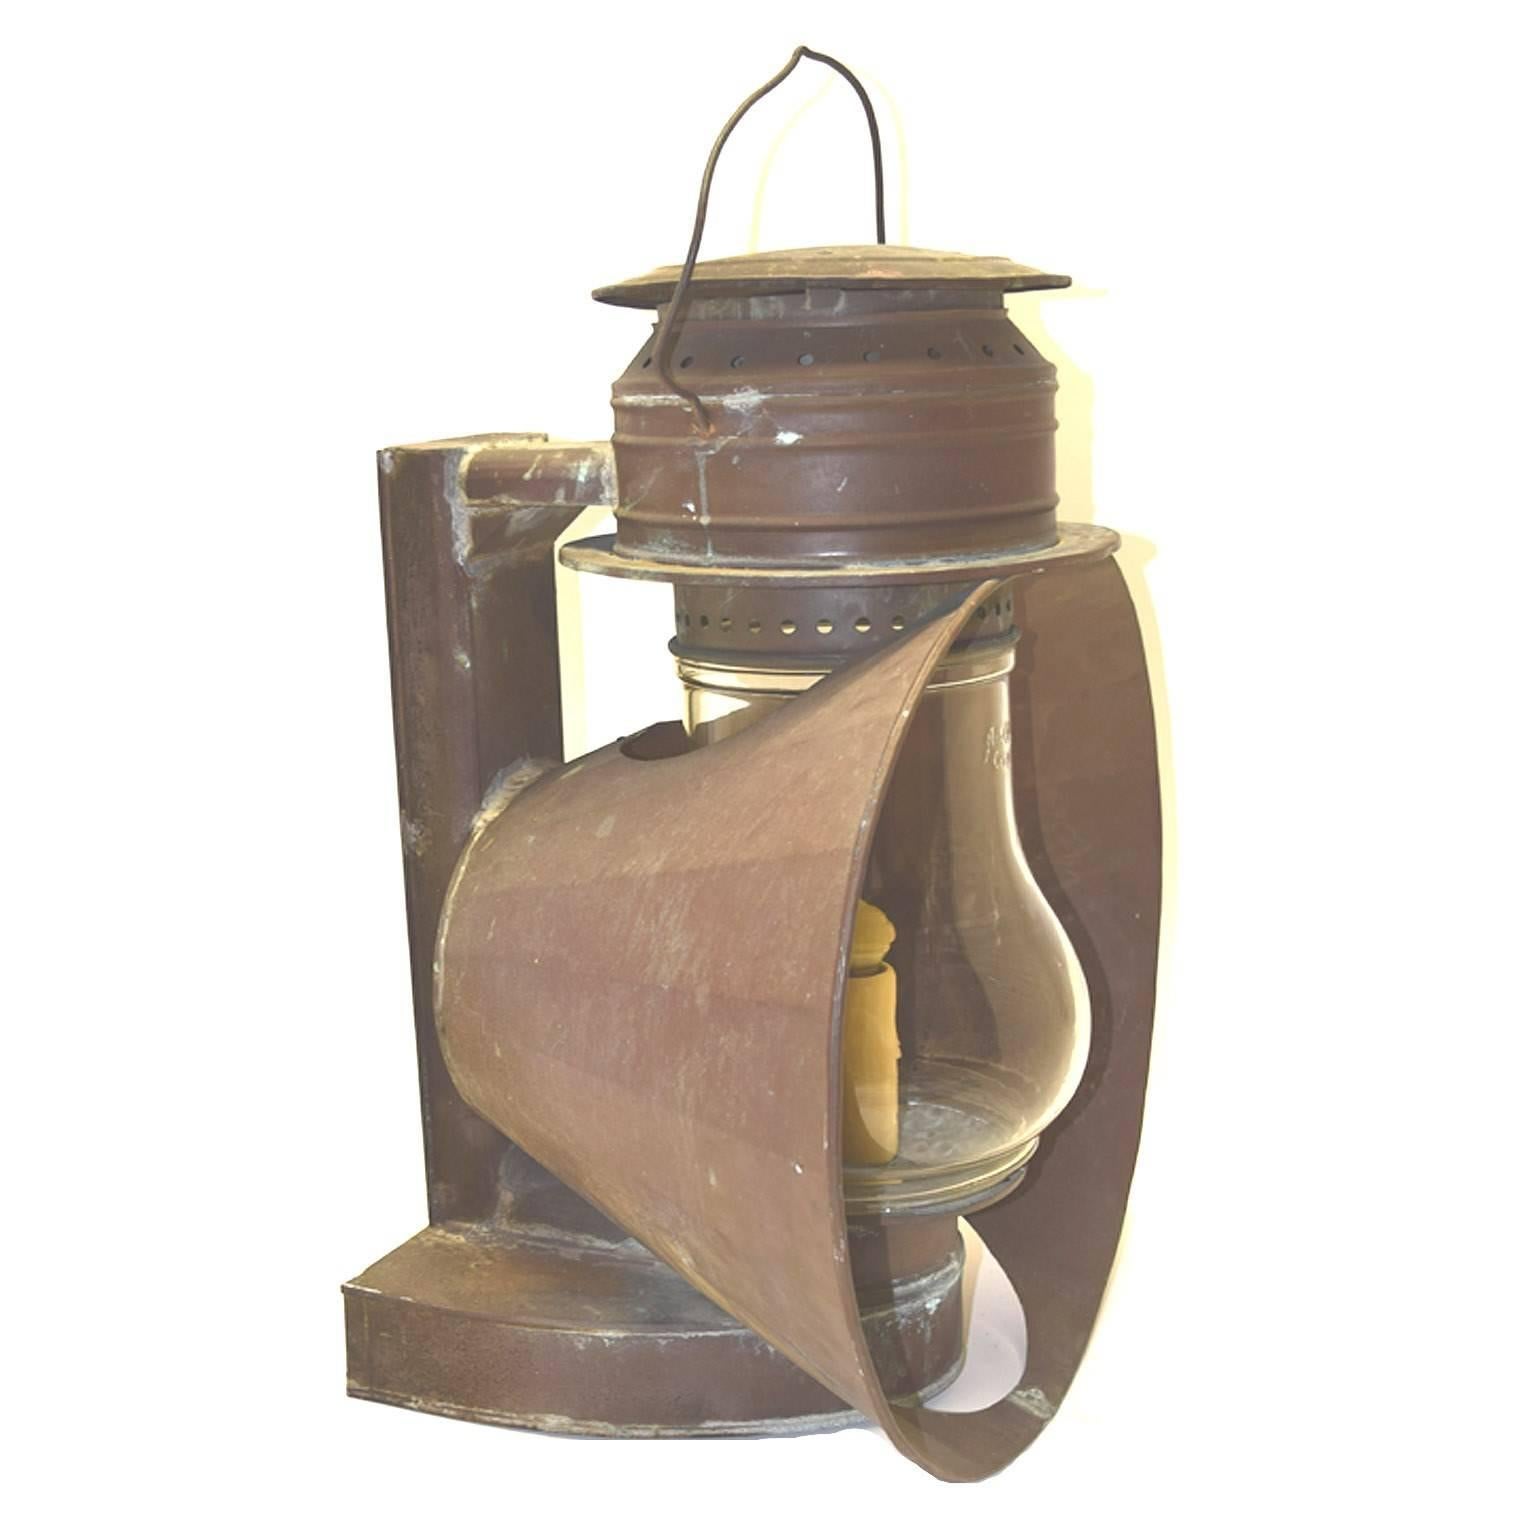 Antique American copper ship lanterns, with swing handles, cylindrical glass chimneys, replacements, circular multisided and faceted tapering reflectors, later candle wired, circa 1890-1910.